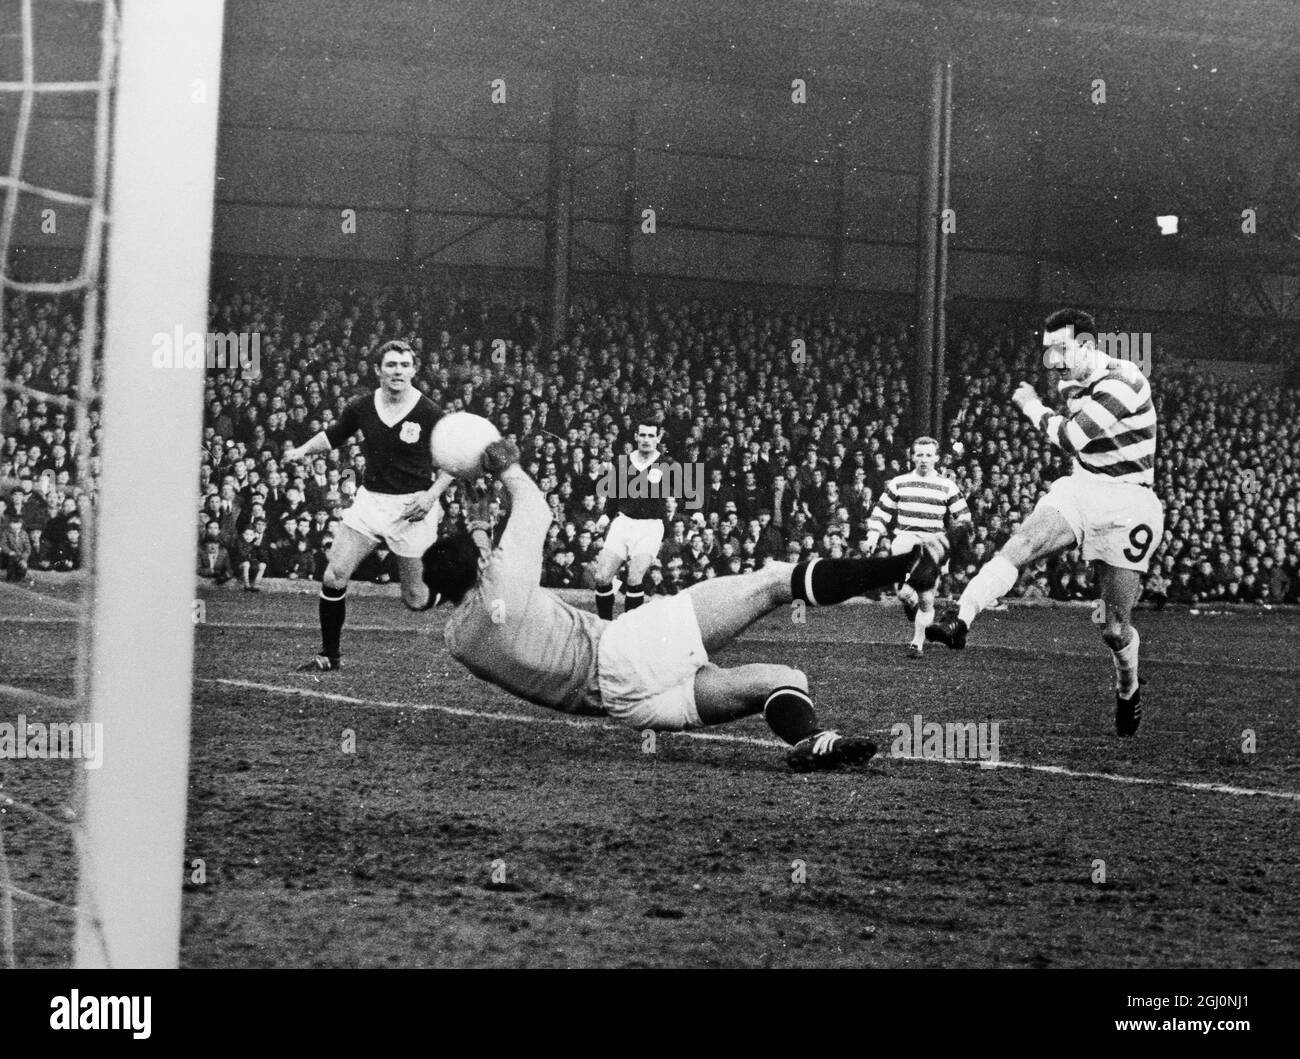 Glasgow ; Celtic centre - forward , Chalmers hits the ball hard at point - blank range but his fine effort is met with an equally fine save from the Dundee goalkeeper Arrol , during the Scottish First Division game played here . During the match , Arrol was beaten five times - the final score being 5 - 0 . 7 January 1967 Stock Photo